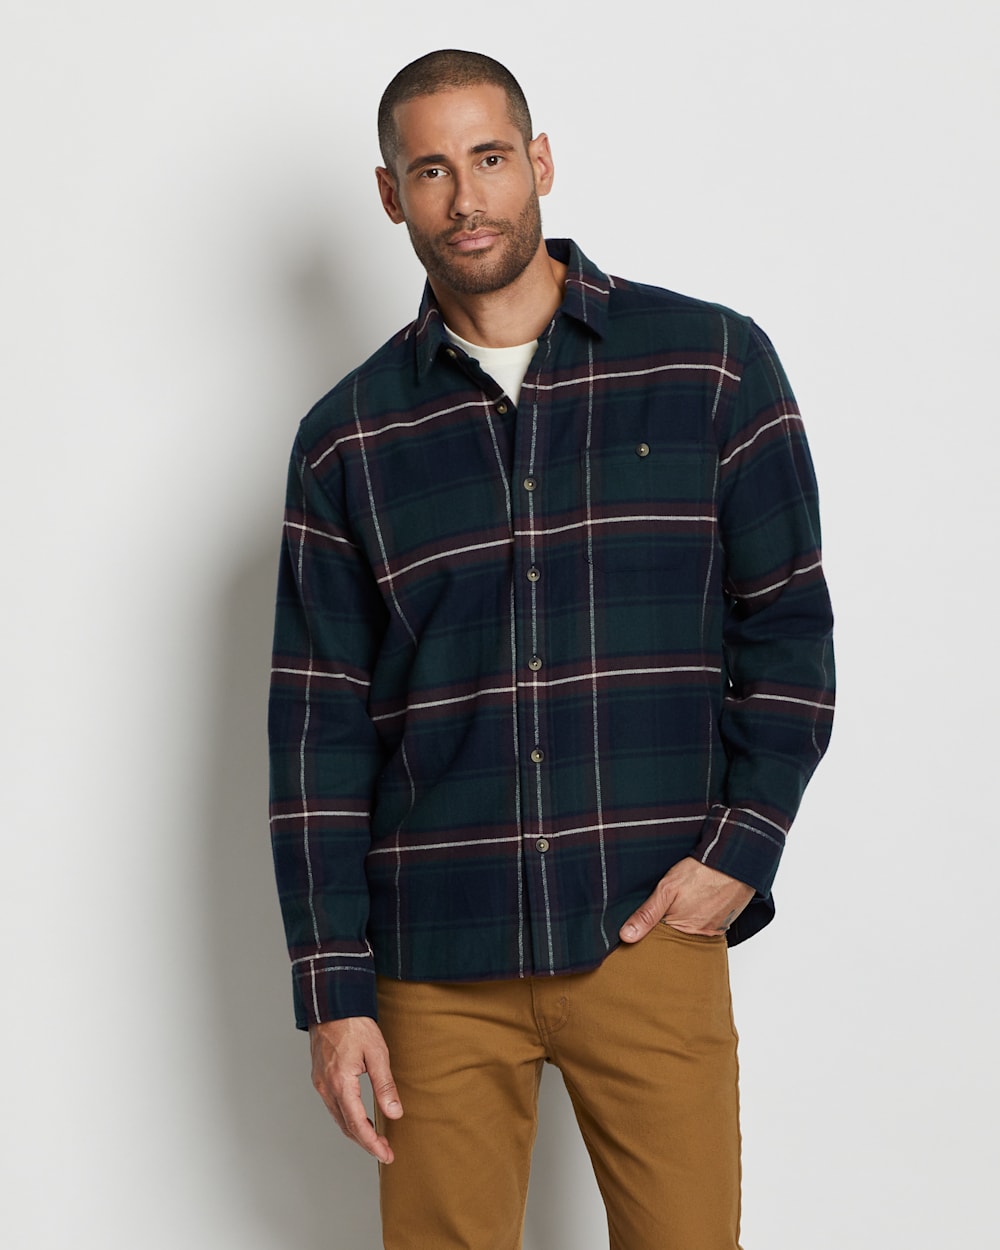 ALTERNATE VIEW OF MEN'S FREMONT DOUBLE-BRUSHED FLANNEL SHIRT IN GREEN/NAVY PLAID image number 6